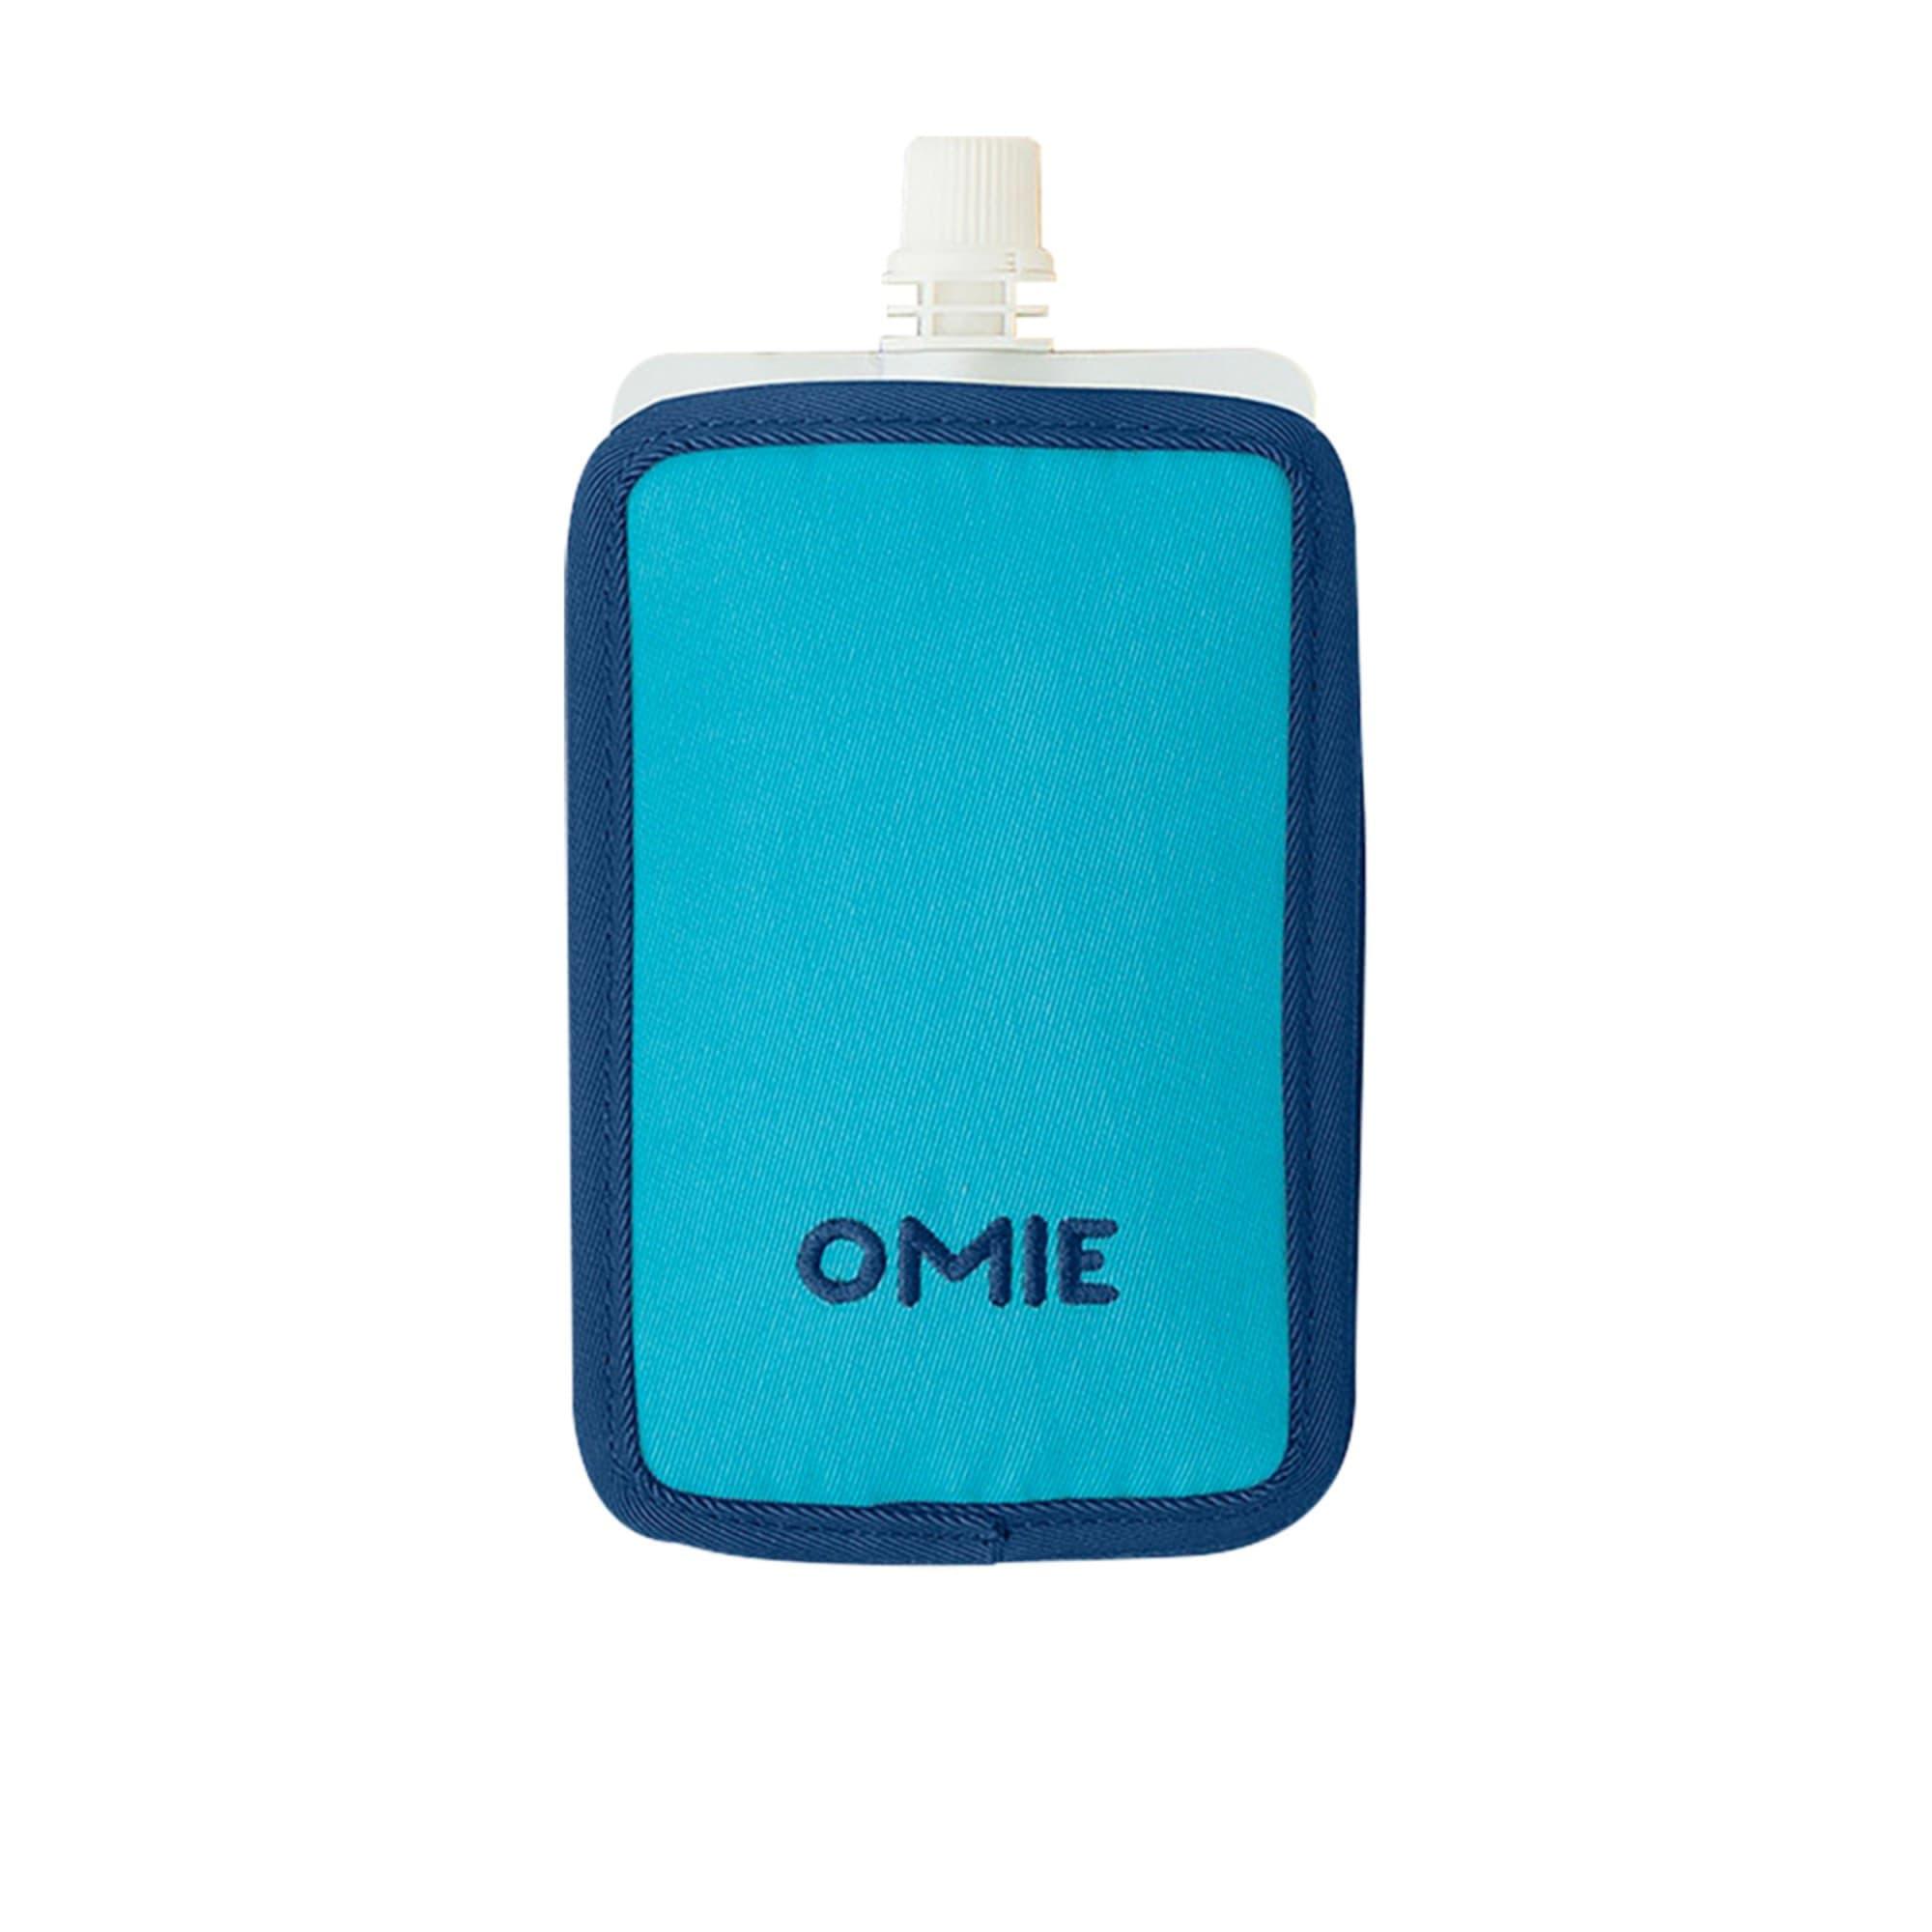 Omie Freezable Food Pouch Blue Image 2